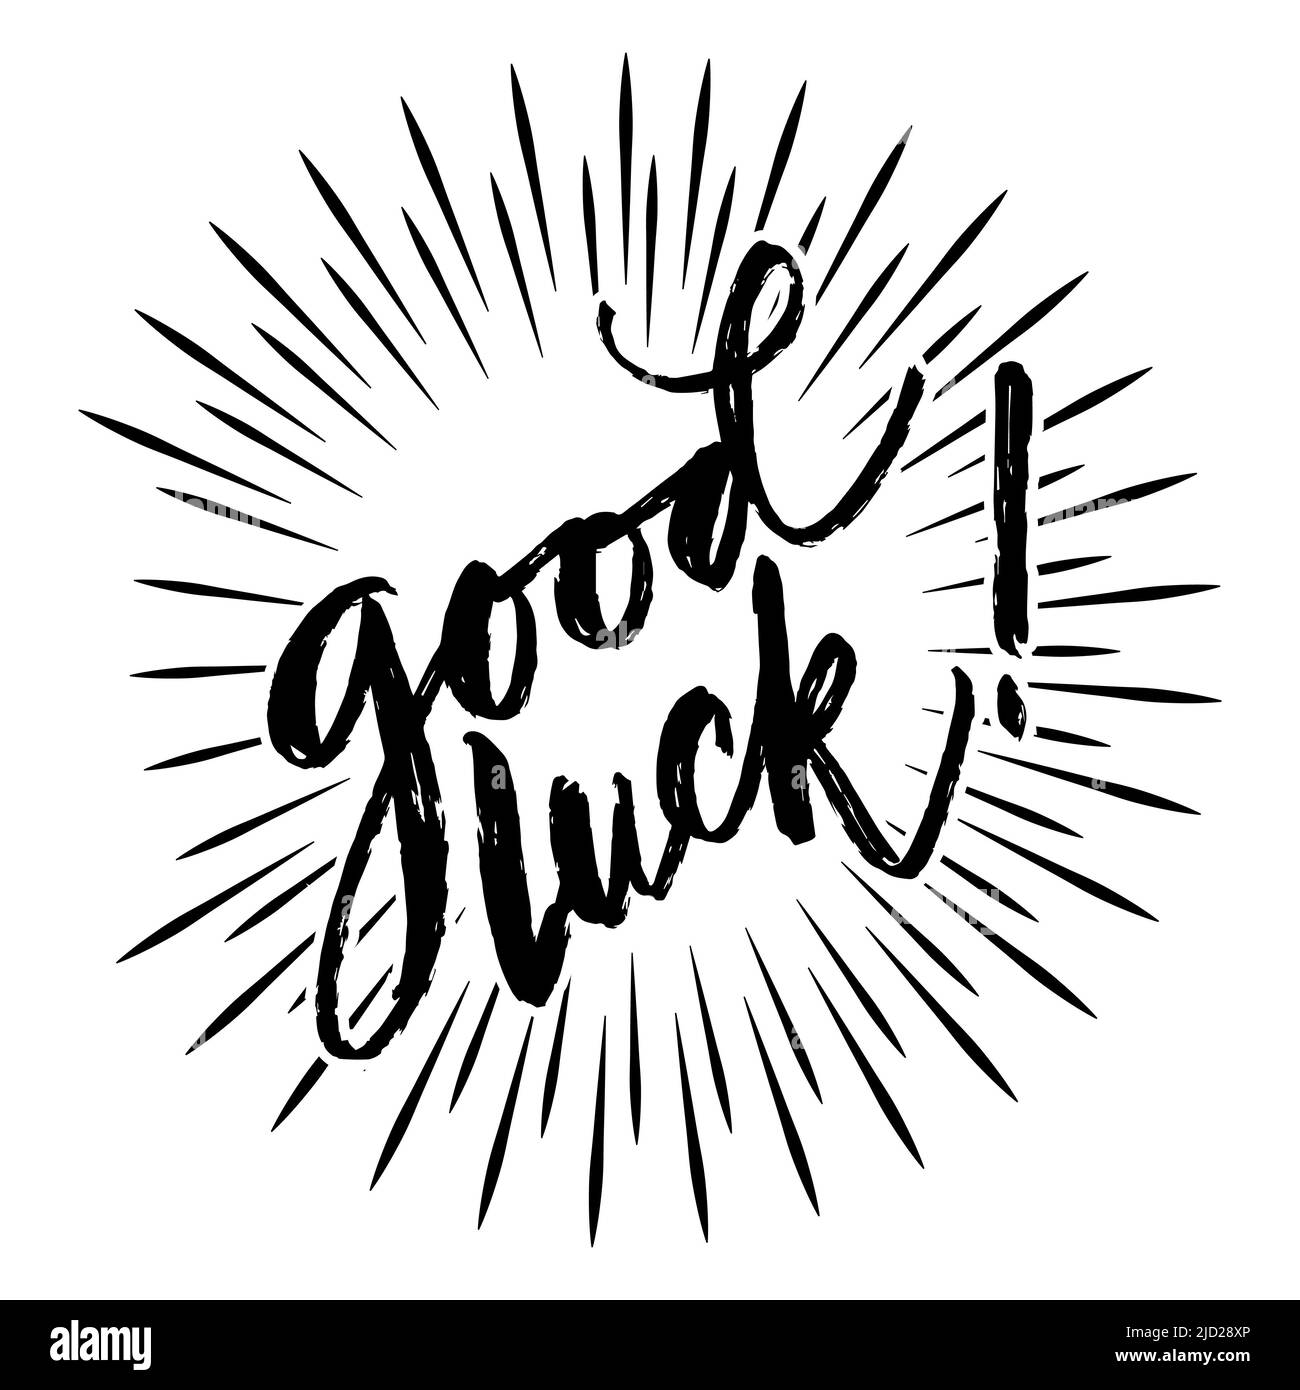 good luck clipart black and white